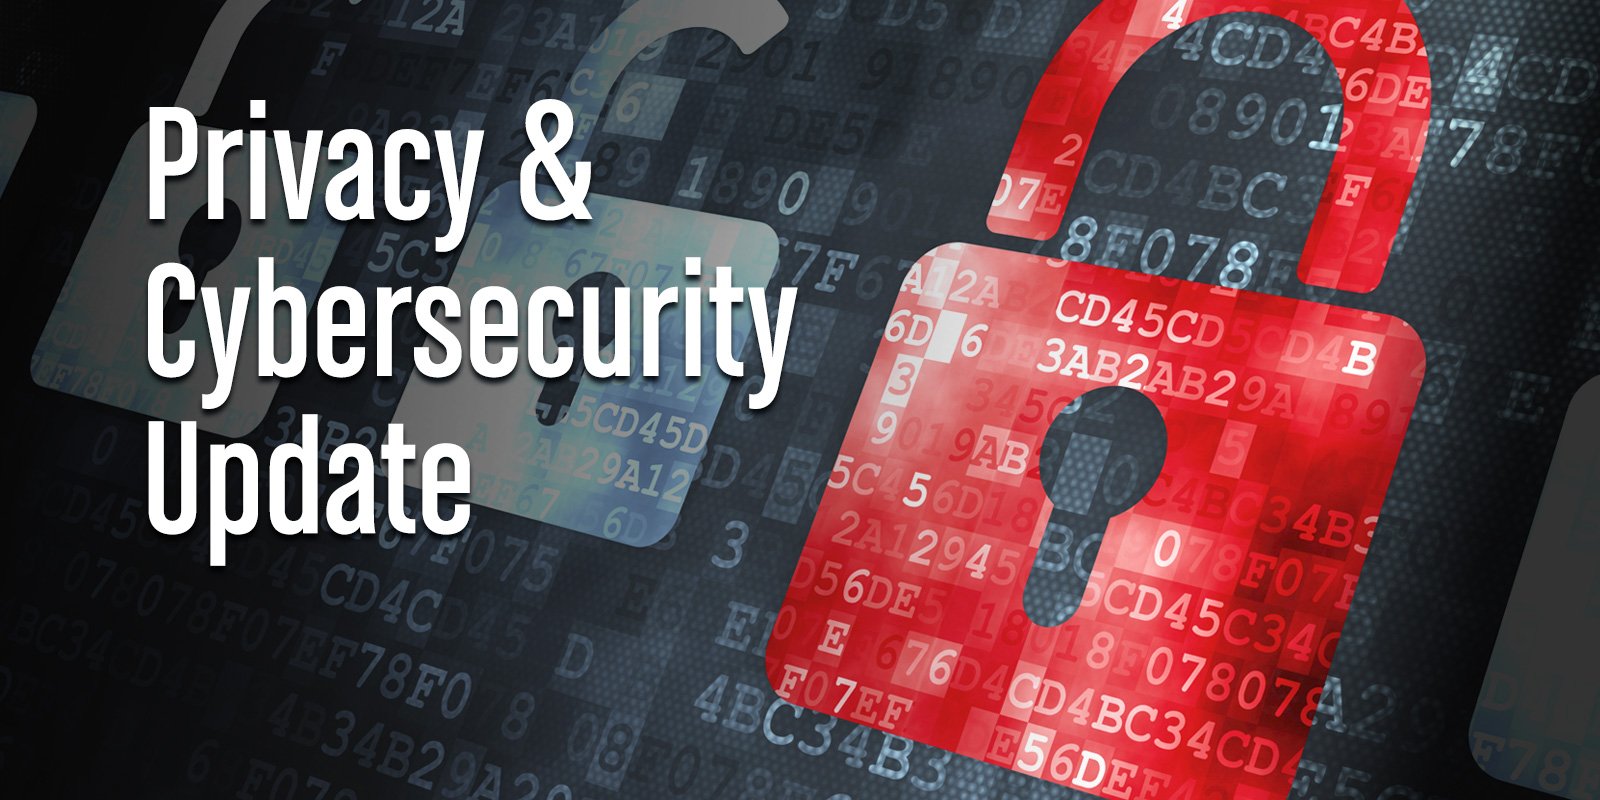 Global Privacy & Cybersecurity Update Vol. 16